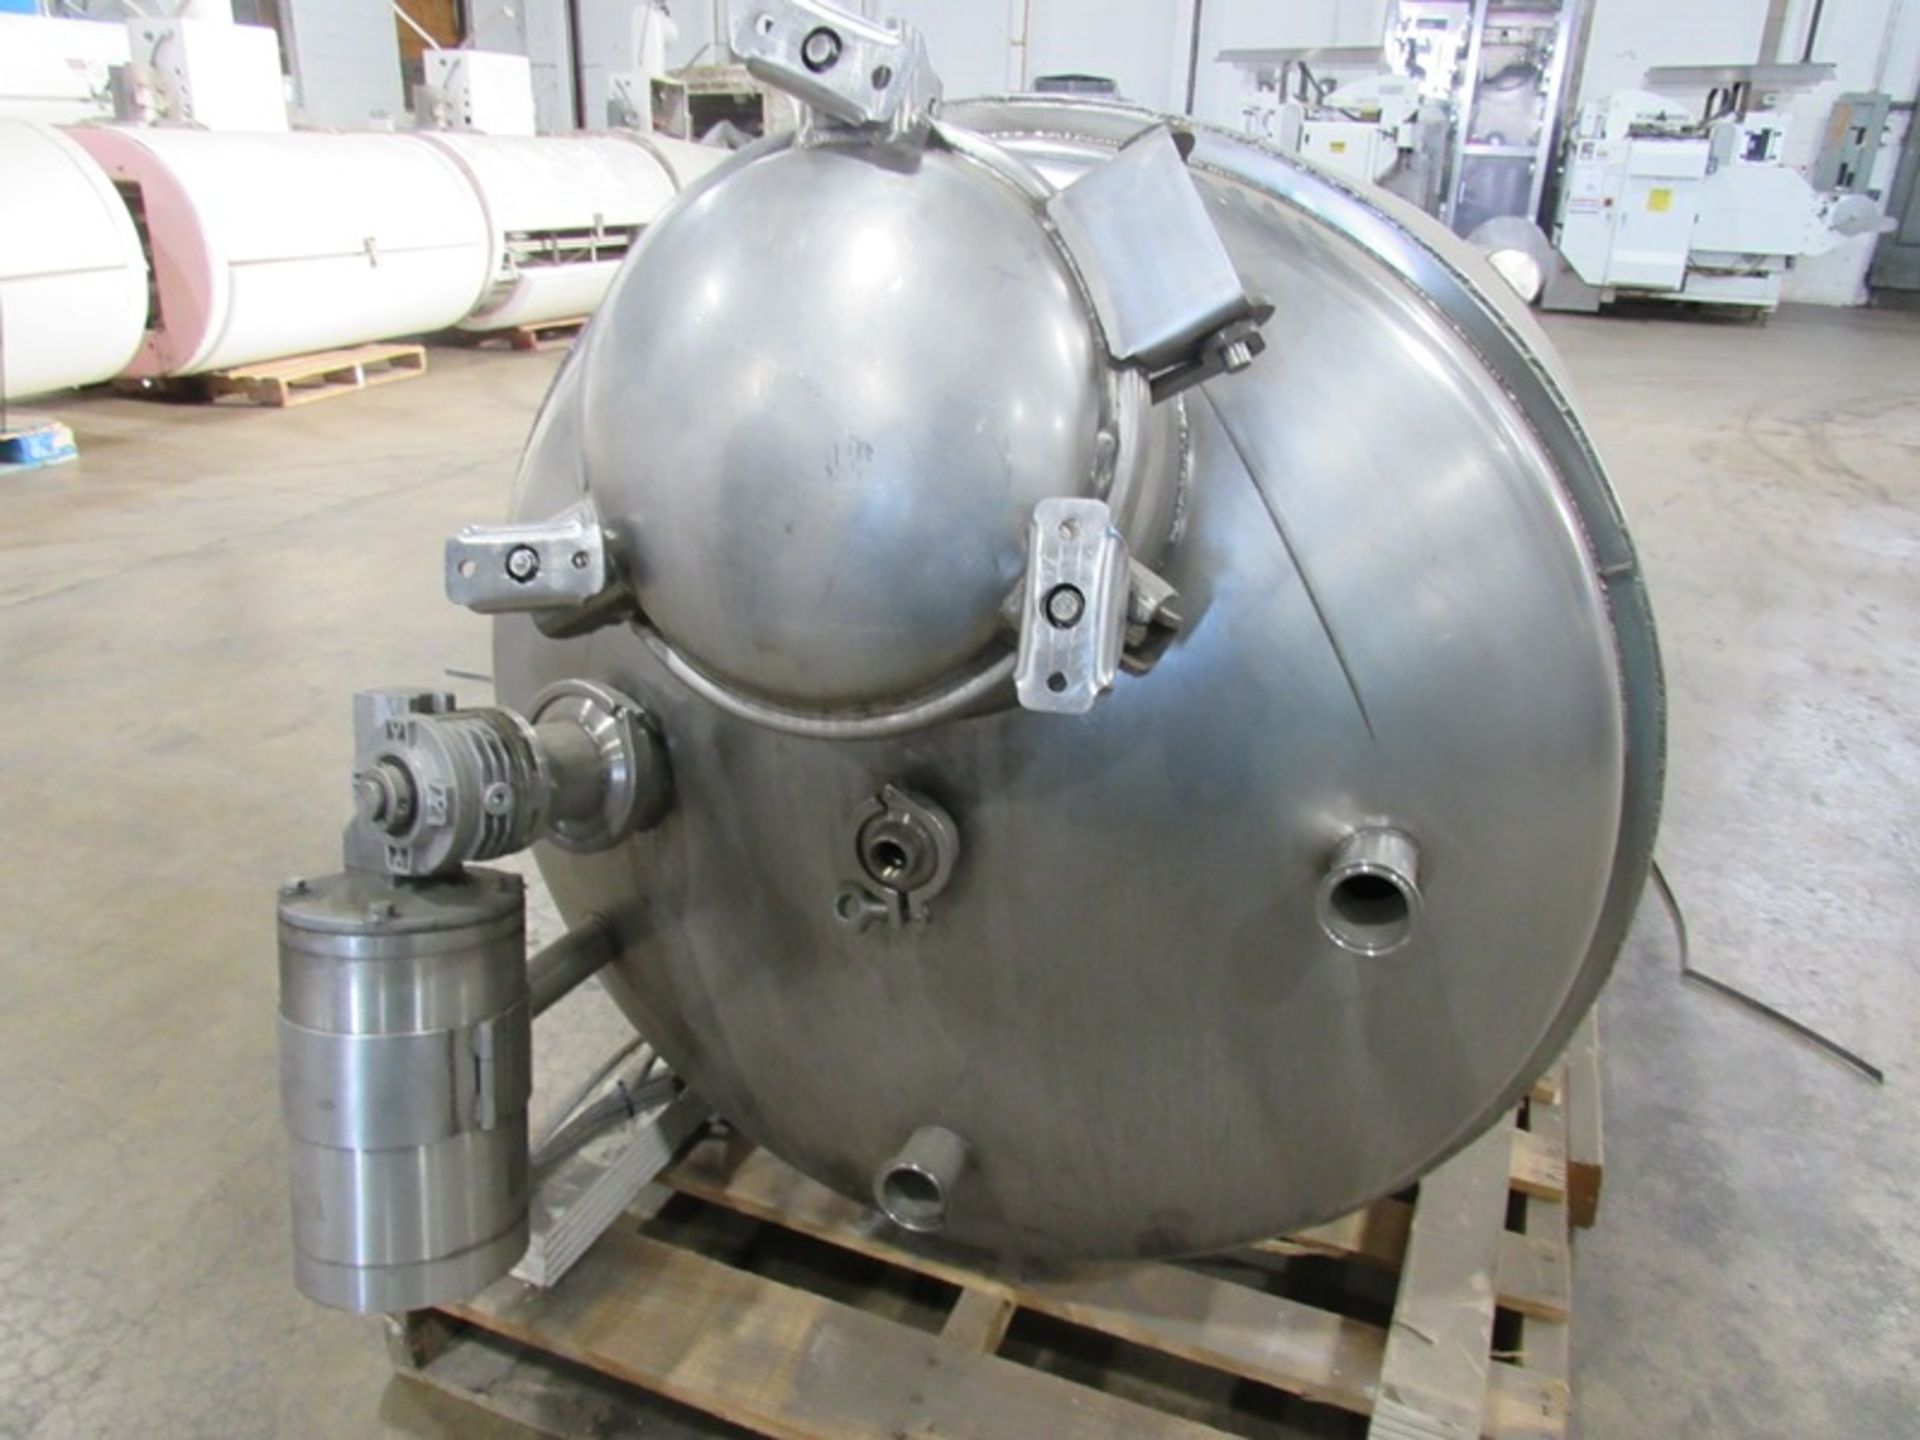 Stainless Steel Mix Tank, 150 gallon capacity, 40" dia. X 36" deep, flat bottom, 3" bottom outlet, - Image 5 of 8